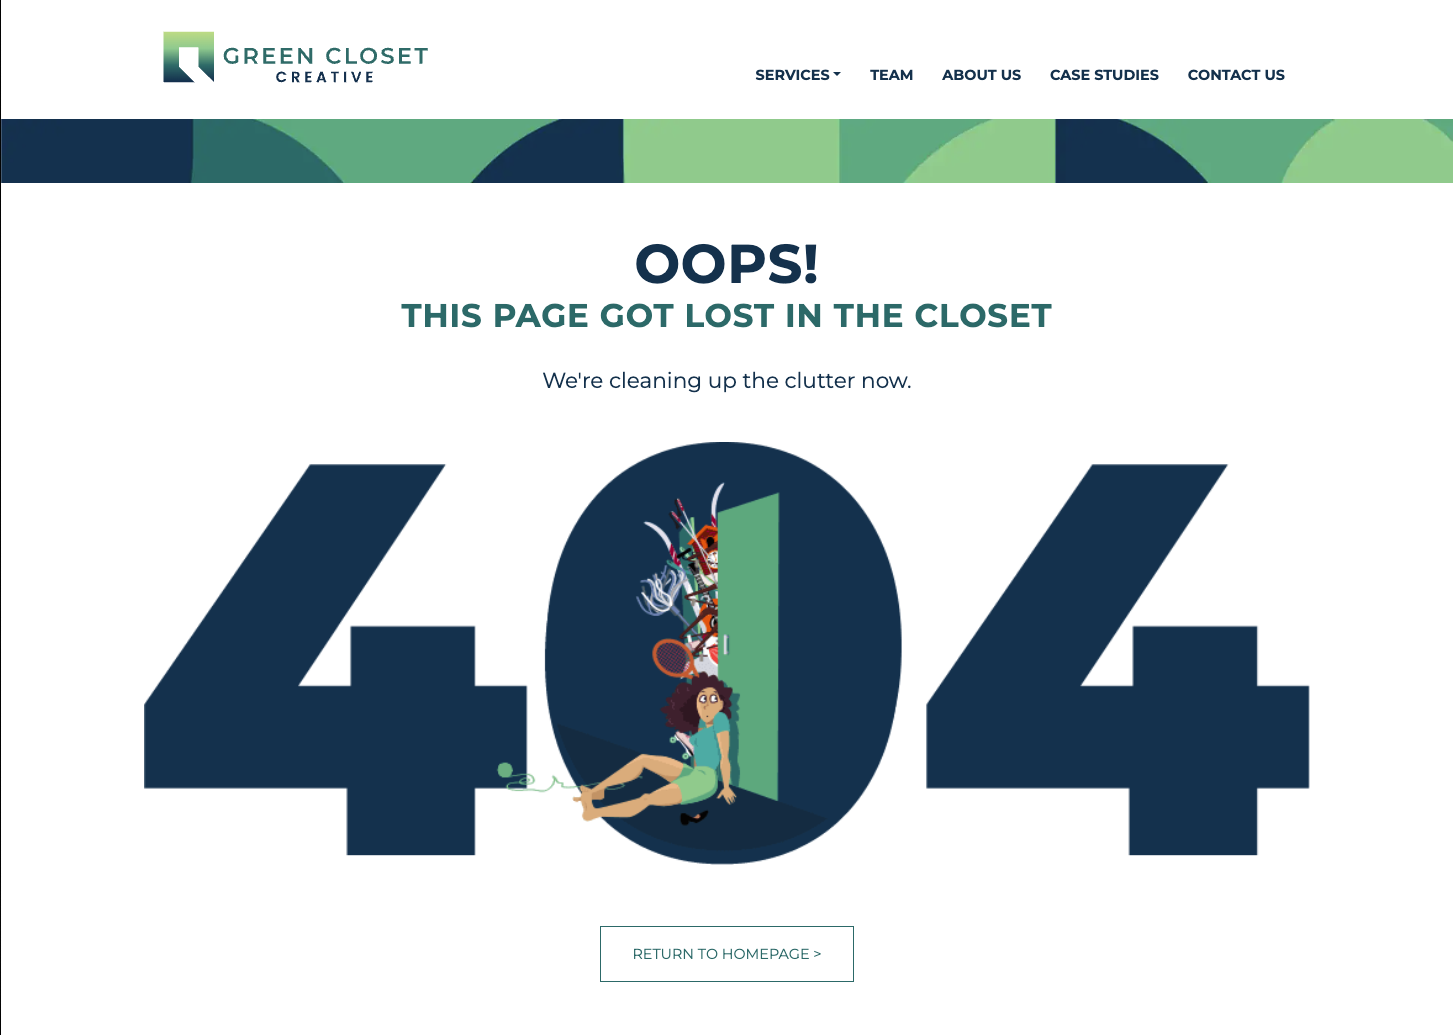 The Green Closet Creative 404 page design quite literally includes a closet to add humor and cleverness to our 404 page